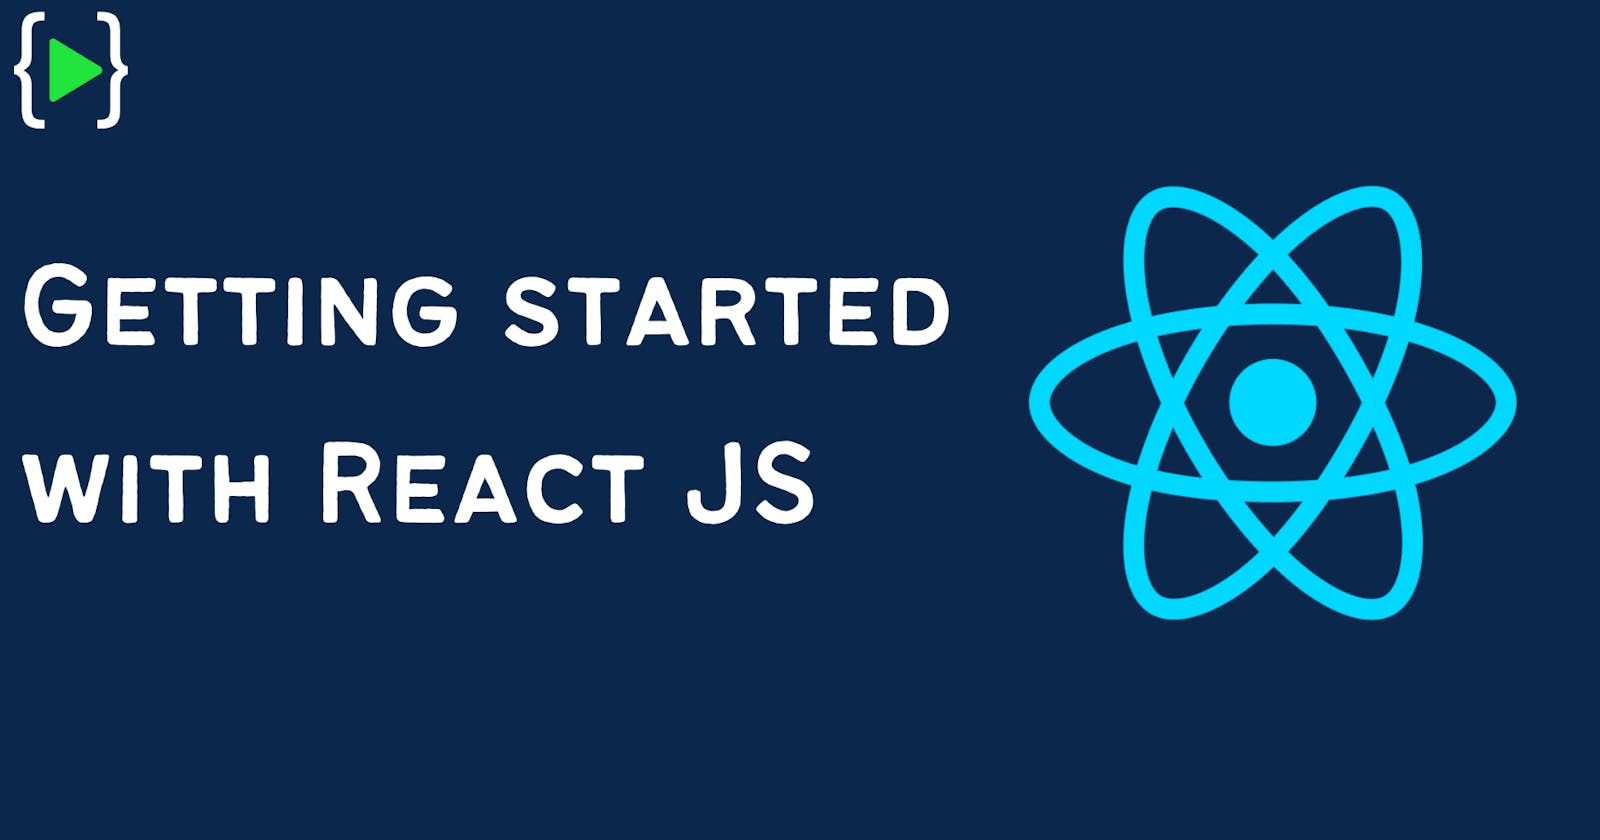 Getting started with React JS⚛️